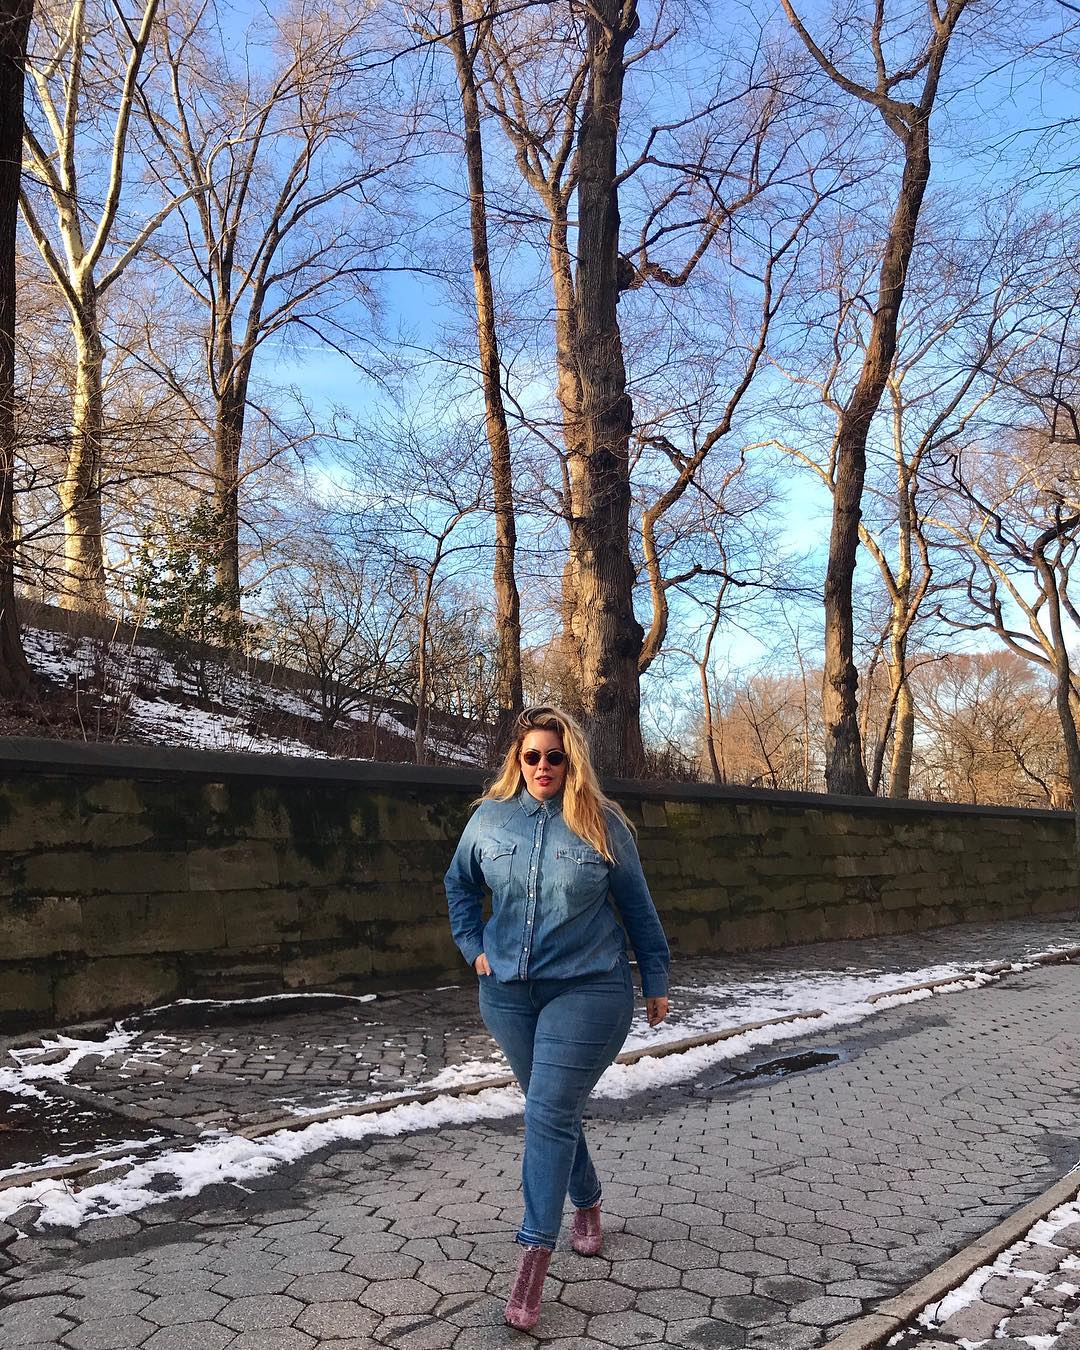 21 Best Winter Jeans Outfits for Plus-Sized Women to Stay Cool and Chic